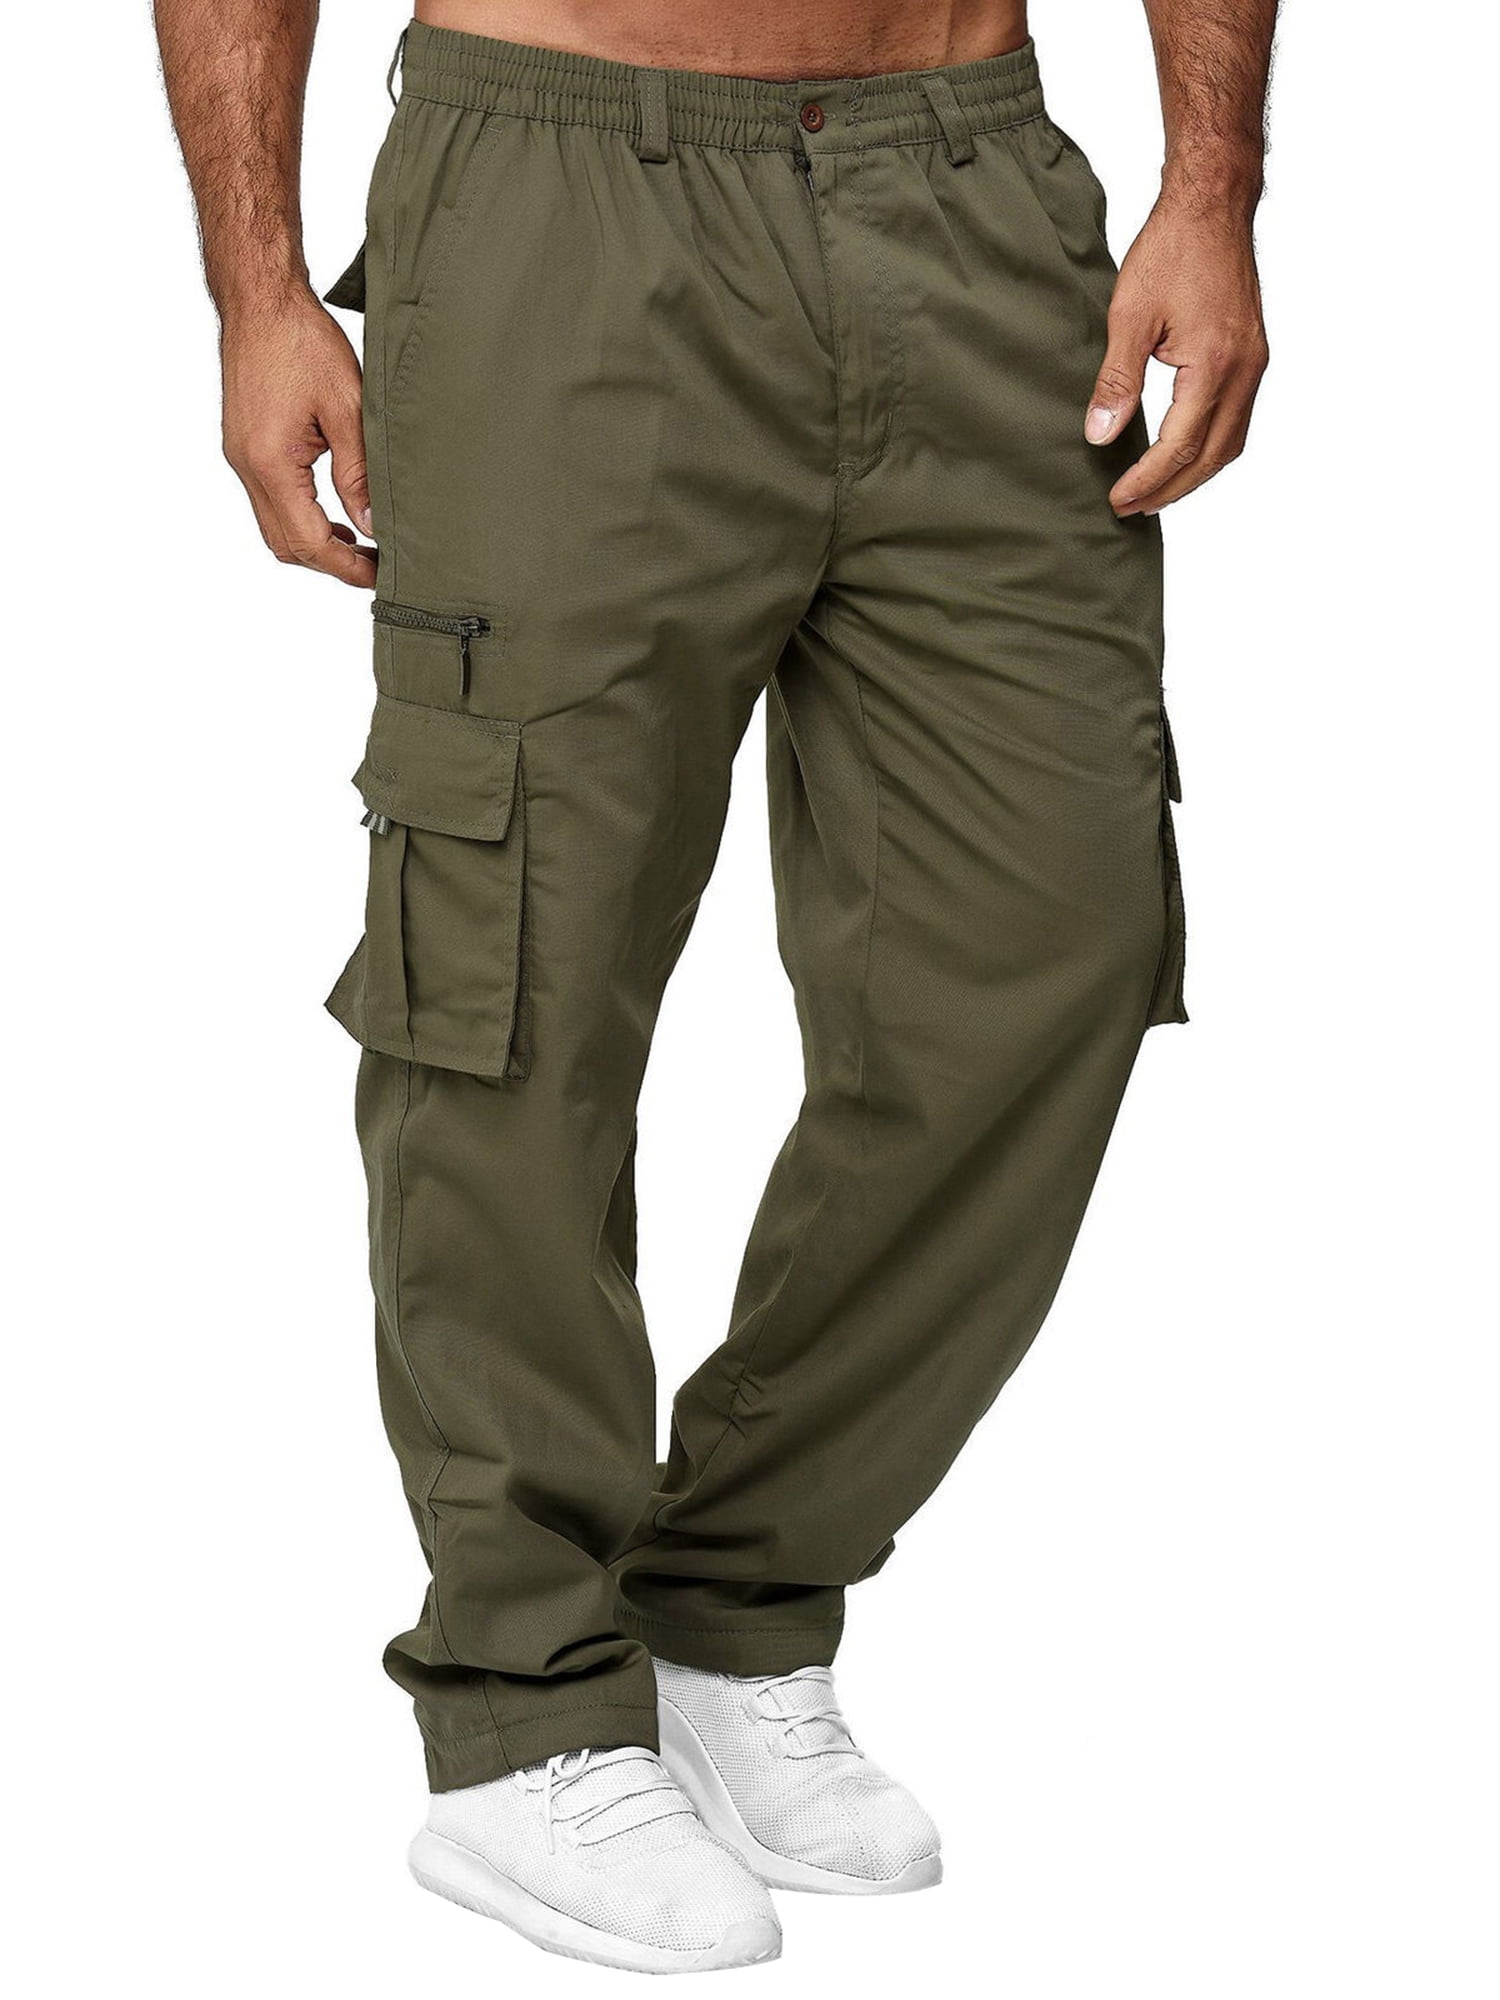  GLESTORE Cargo Pants for Men Relaxed Fit Baggy Hiking Pants  Lightweight Tactical Pants with Pockets Slacks Dark Green 30 : Clothing,  Shoes & Jewelry